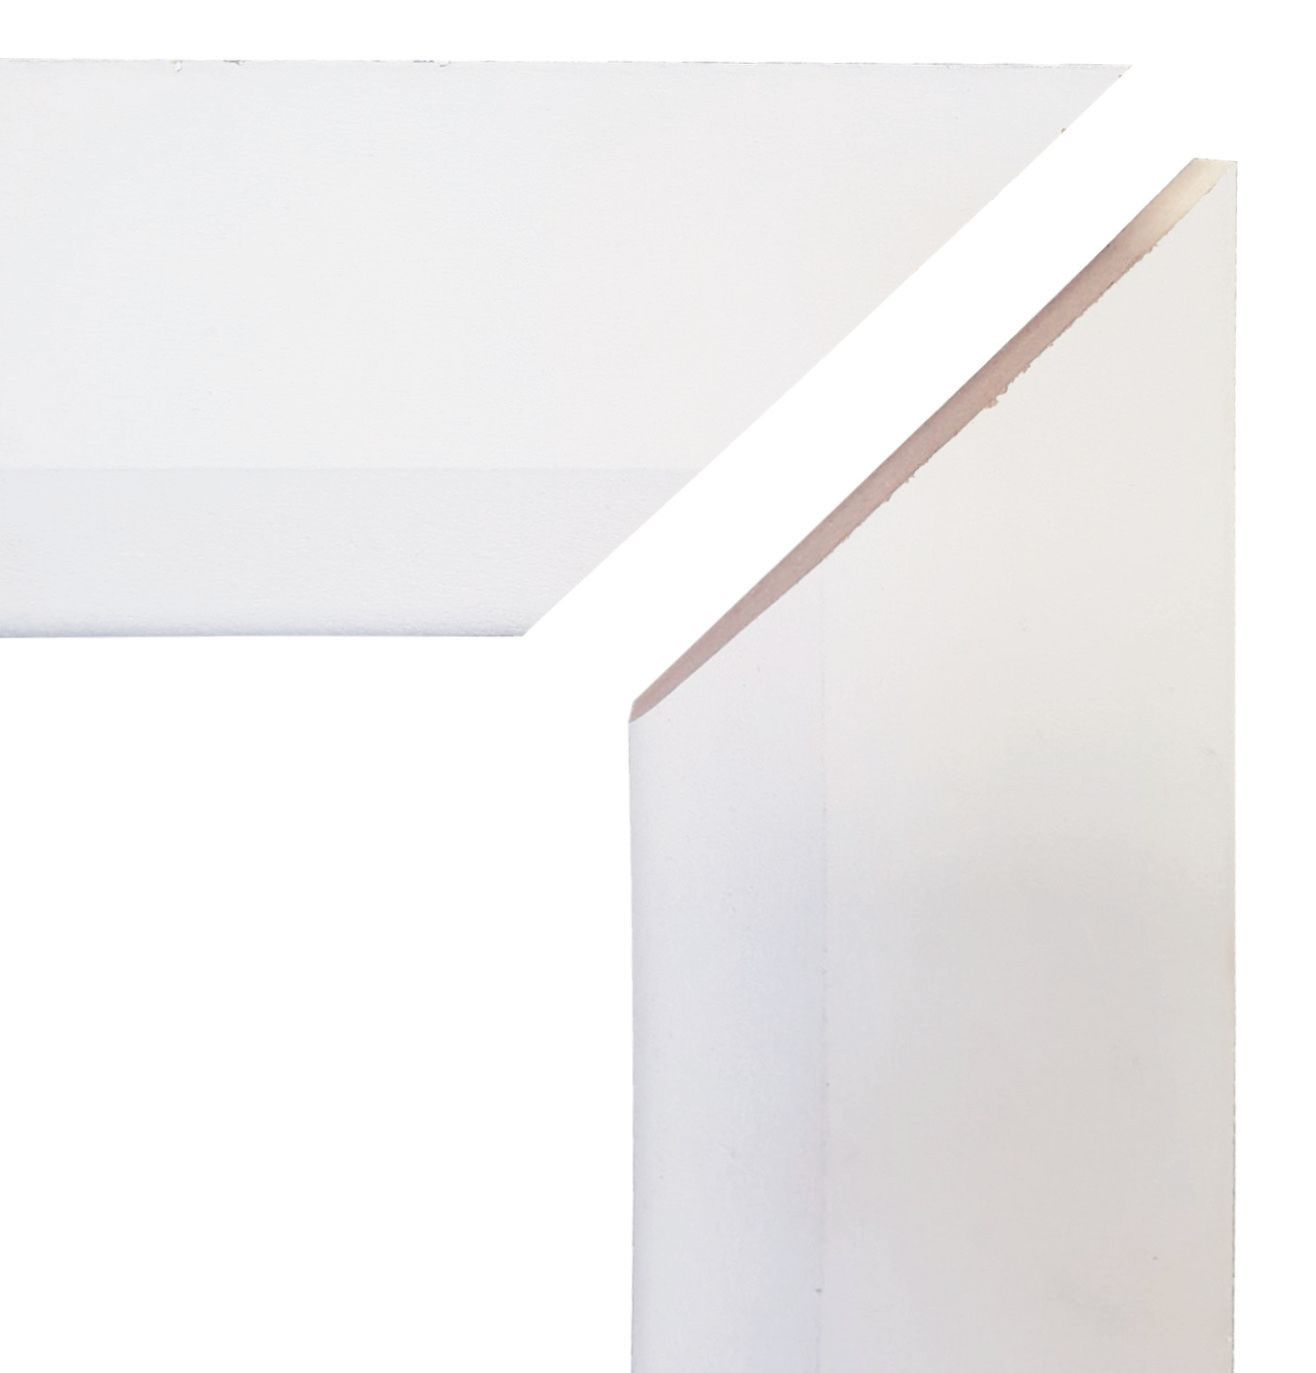 Image of Wickes Chamfered Pre-Mitred Primed MDF Architrave Set - 14.5mm x 69mm x 2.013m